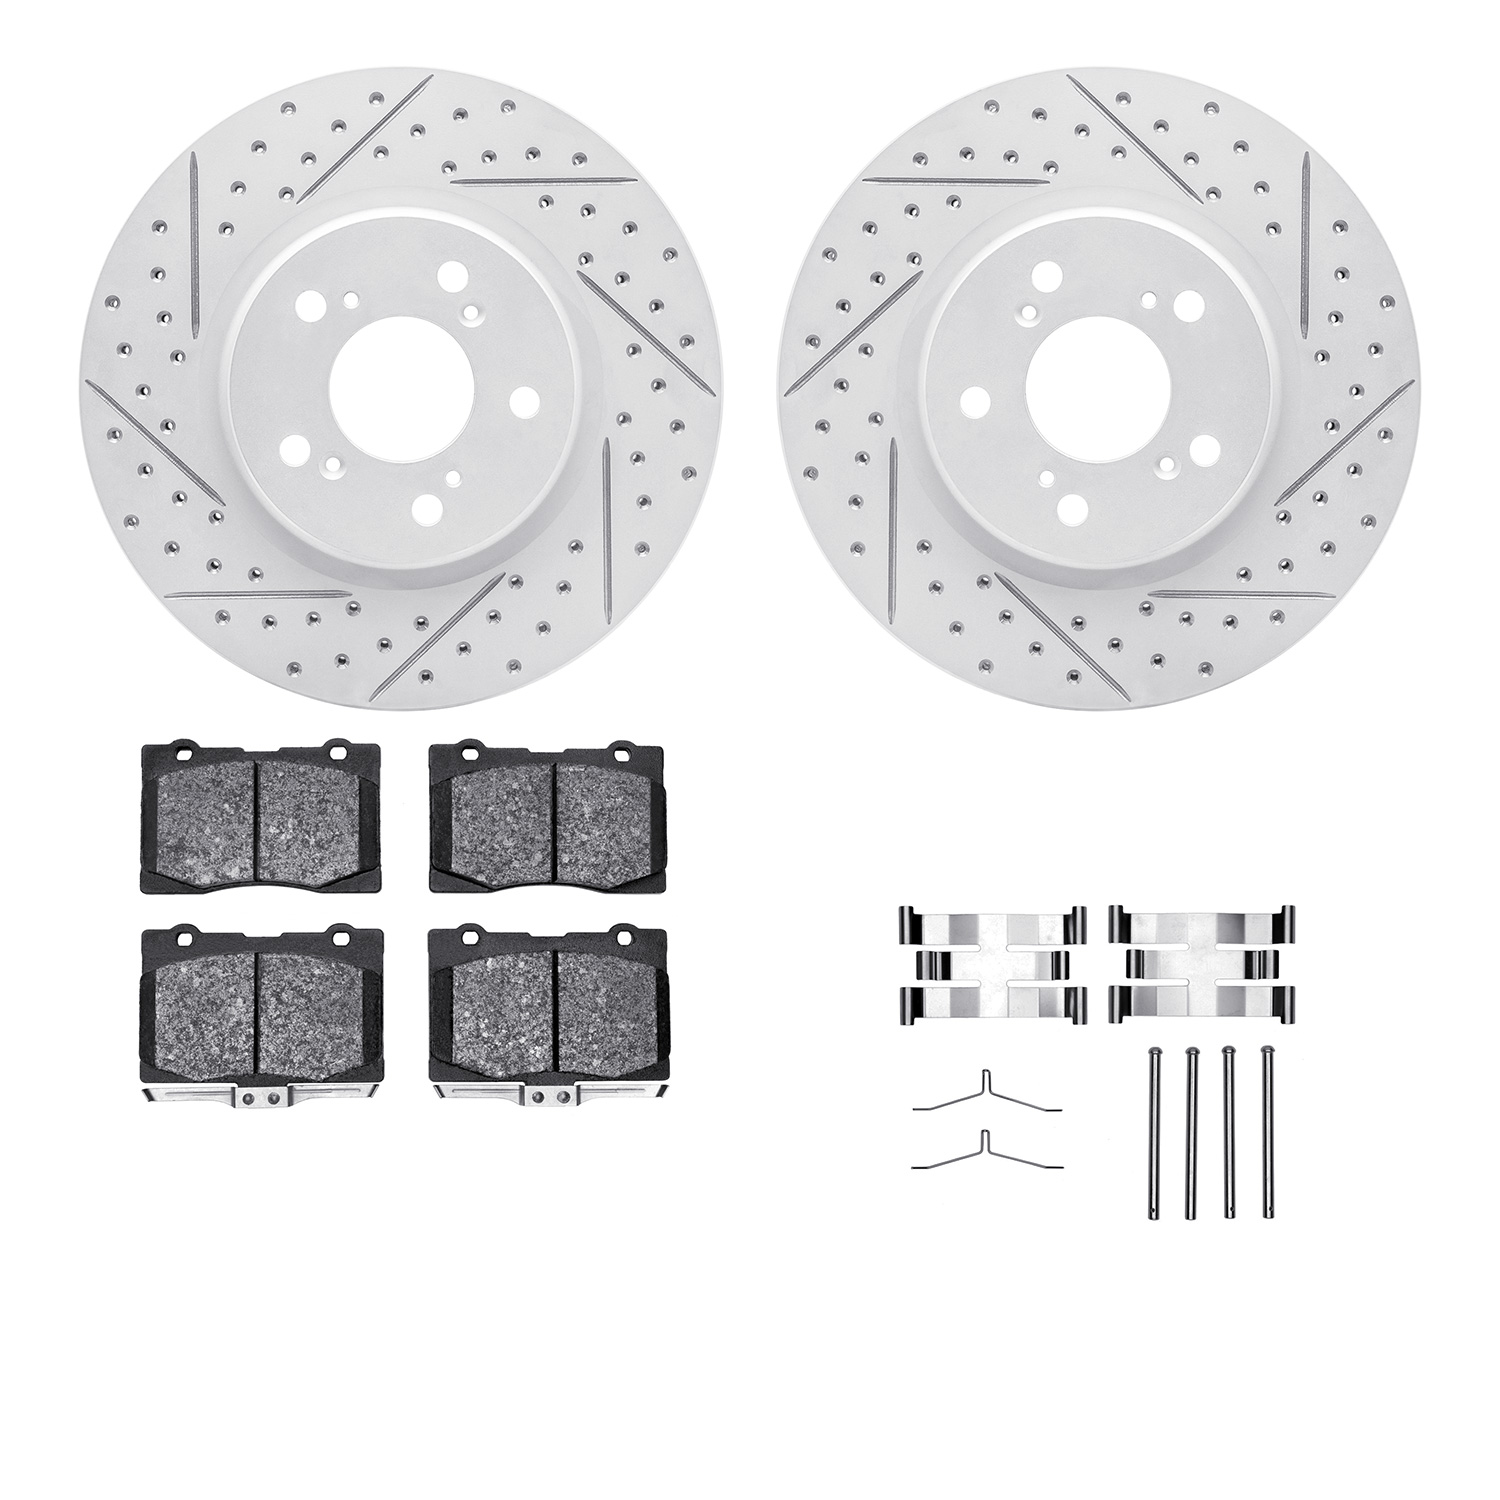 2512-58010 Geoperformance Drilled/Slotted Rotors w/5000 Advanced Brake Pads Kit & Hardware, 2005-2012 Acura/Honda, Position: Fro